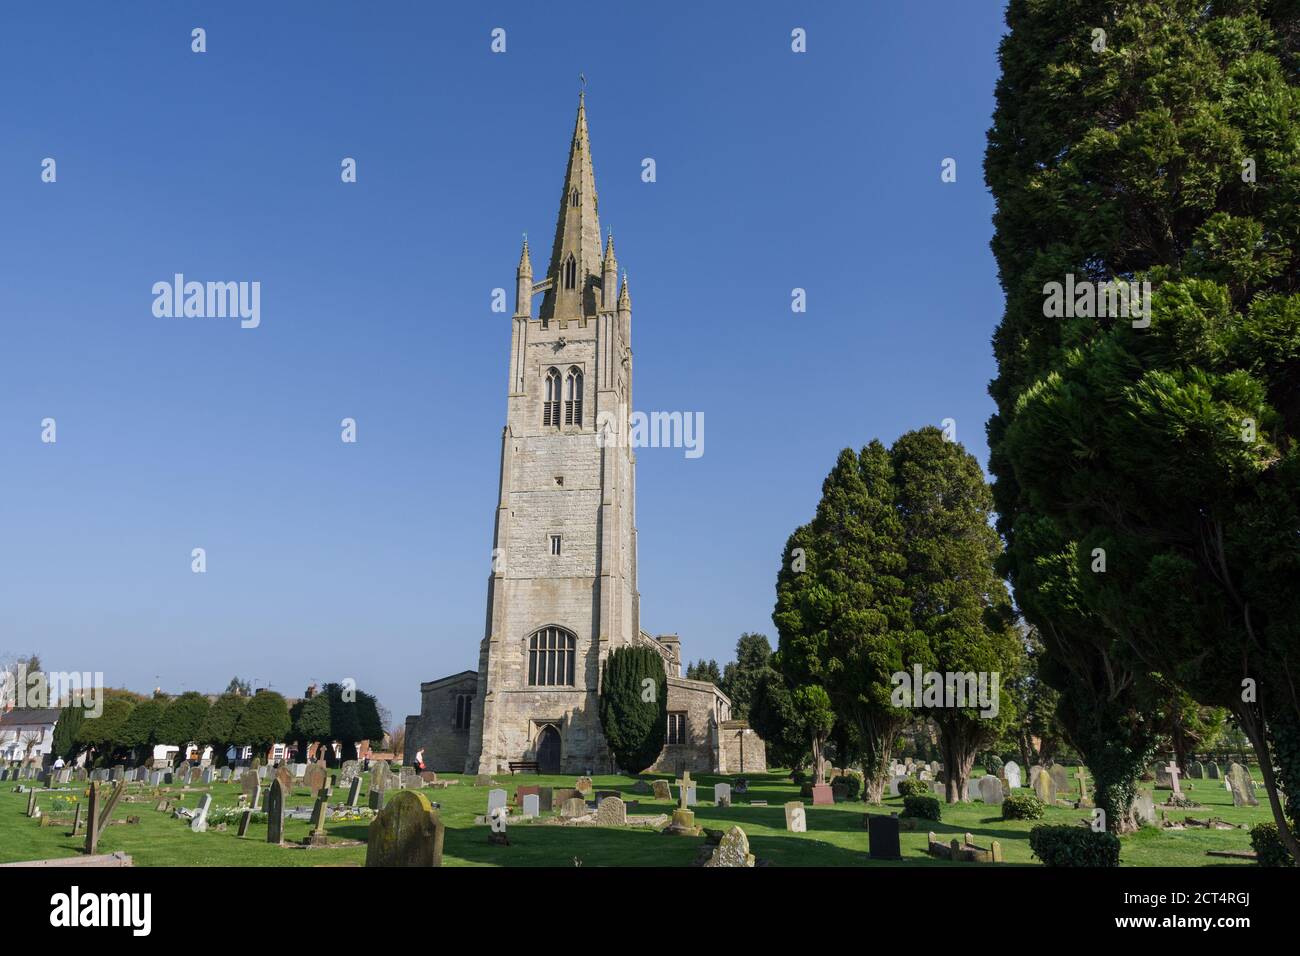 The church of St James the Great with its tall Perpendicular Gothic spire, Hanslope, Buckinghamshire, UK Stock Photo